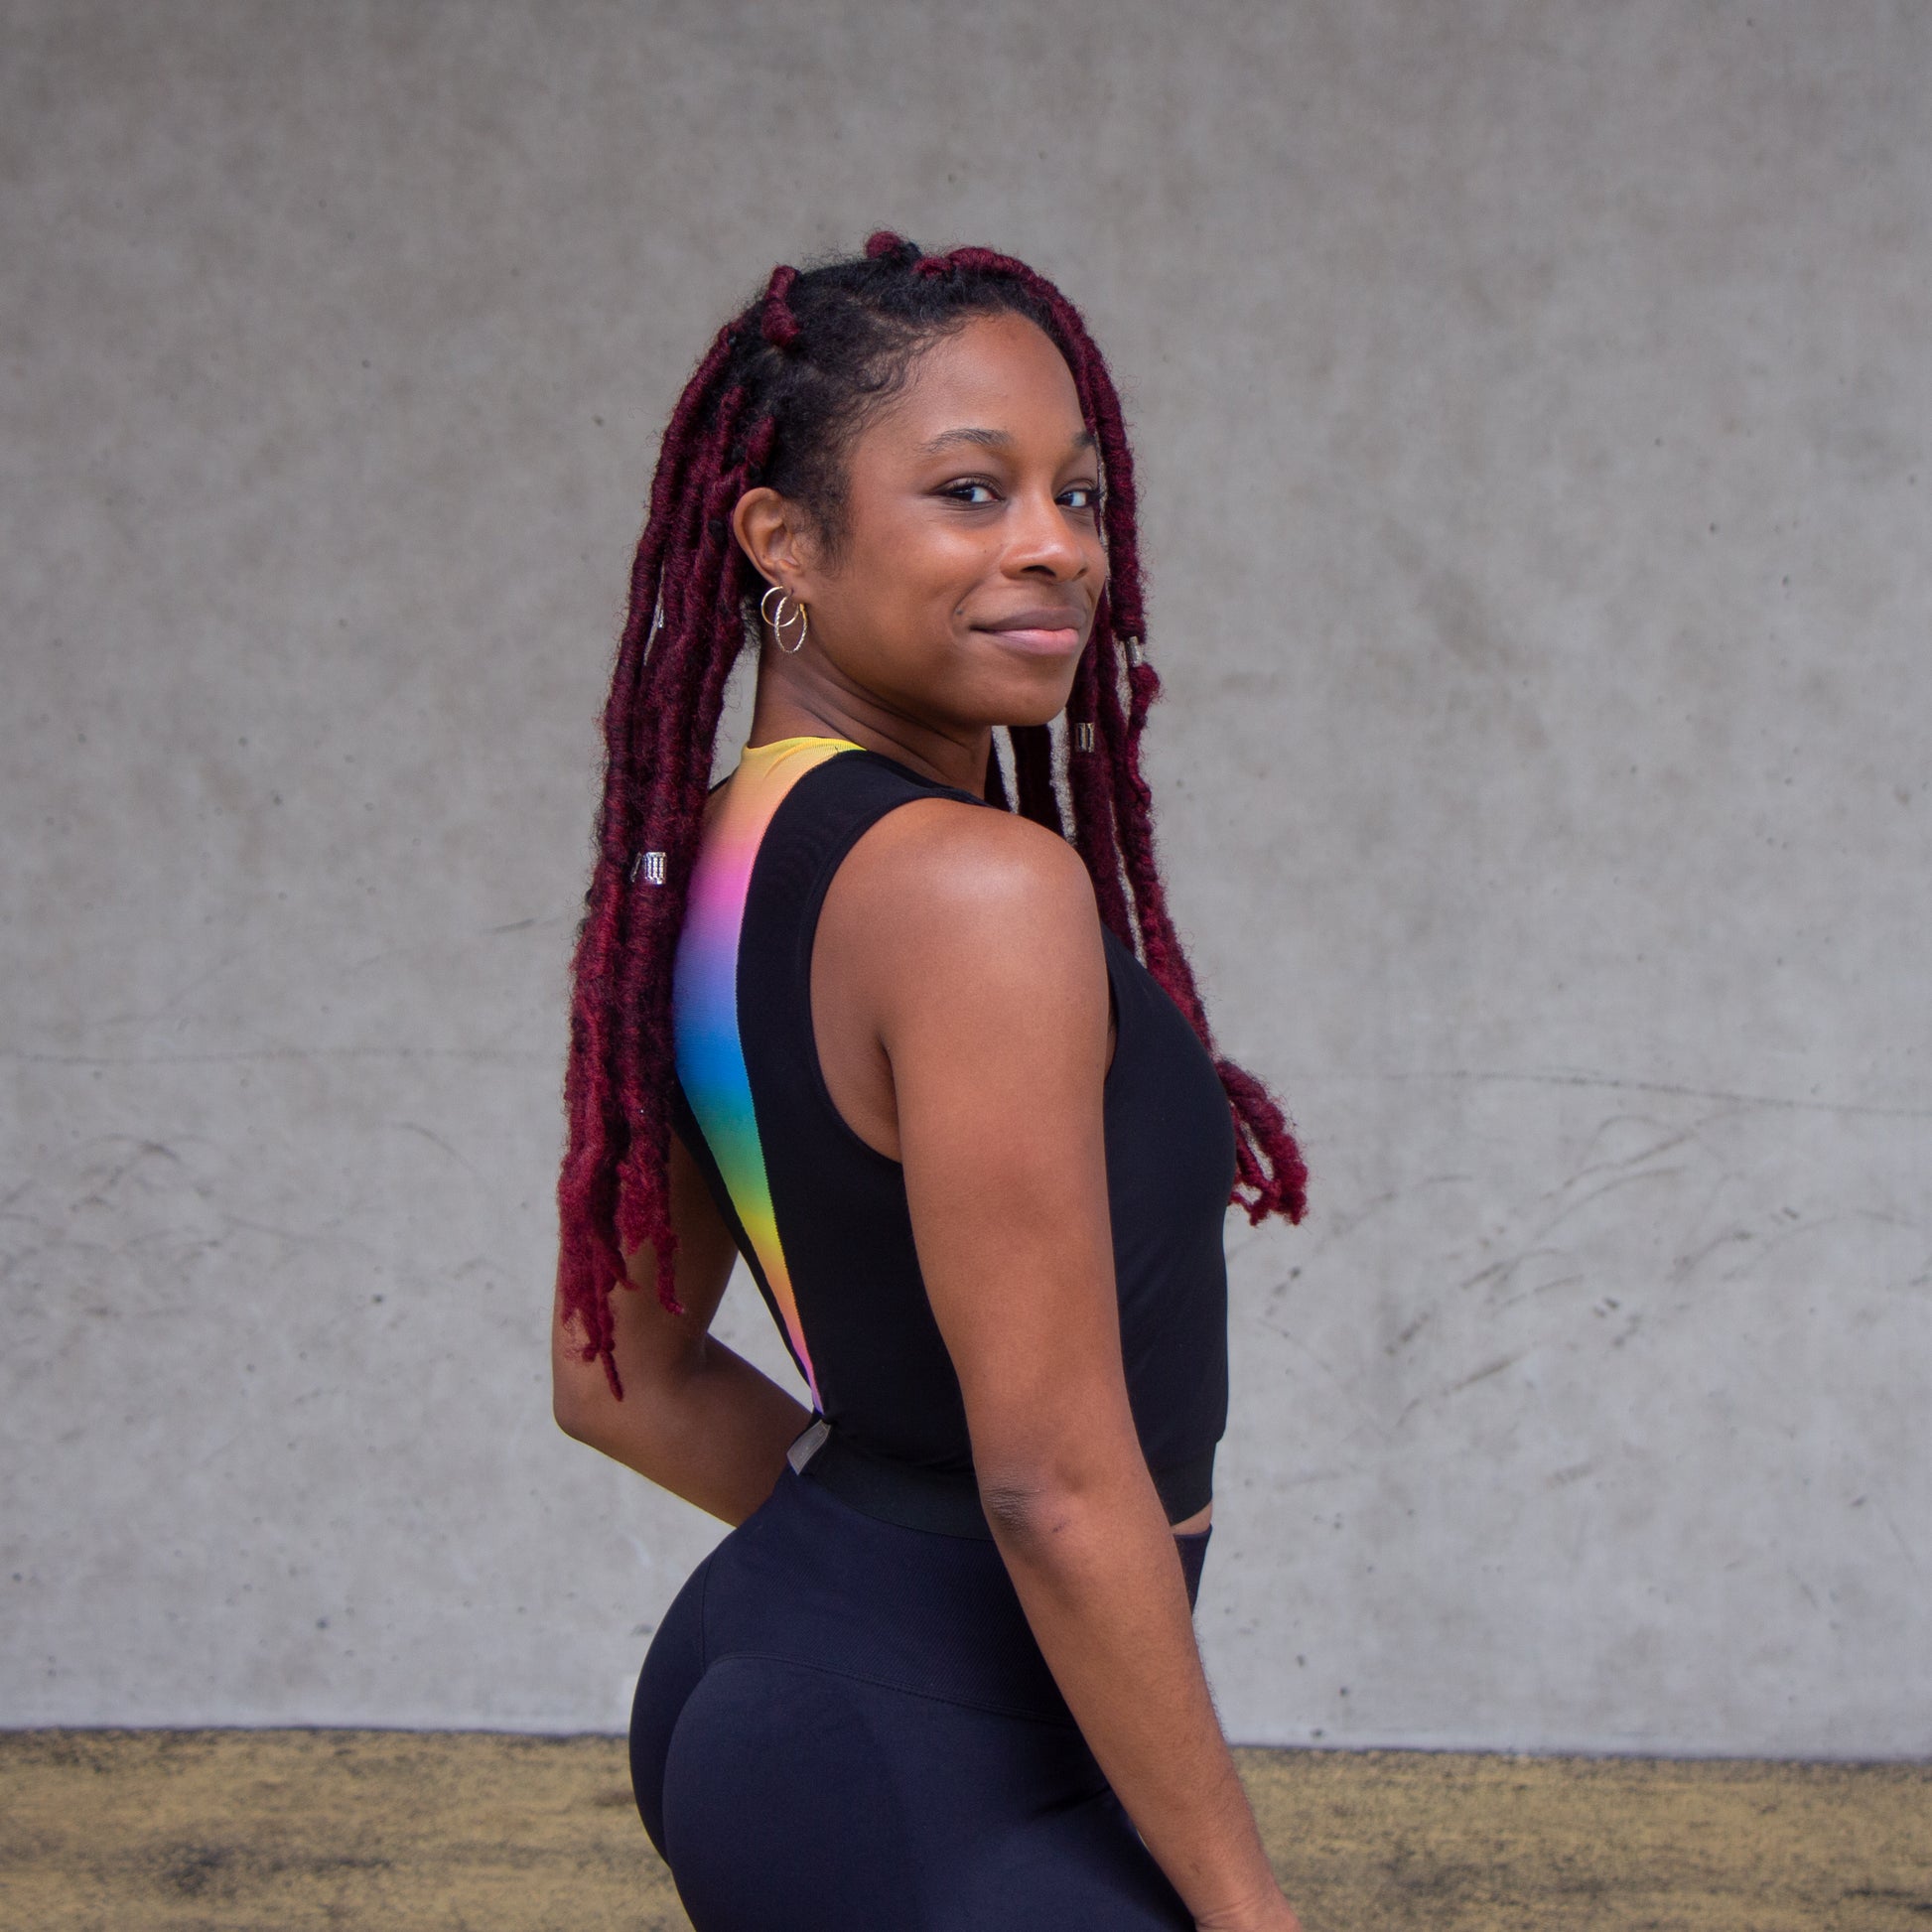 a photo of a black woman looking over her shoulder wearing a black croptop with rainbow accents 